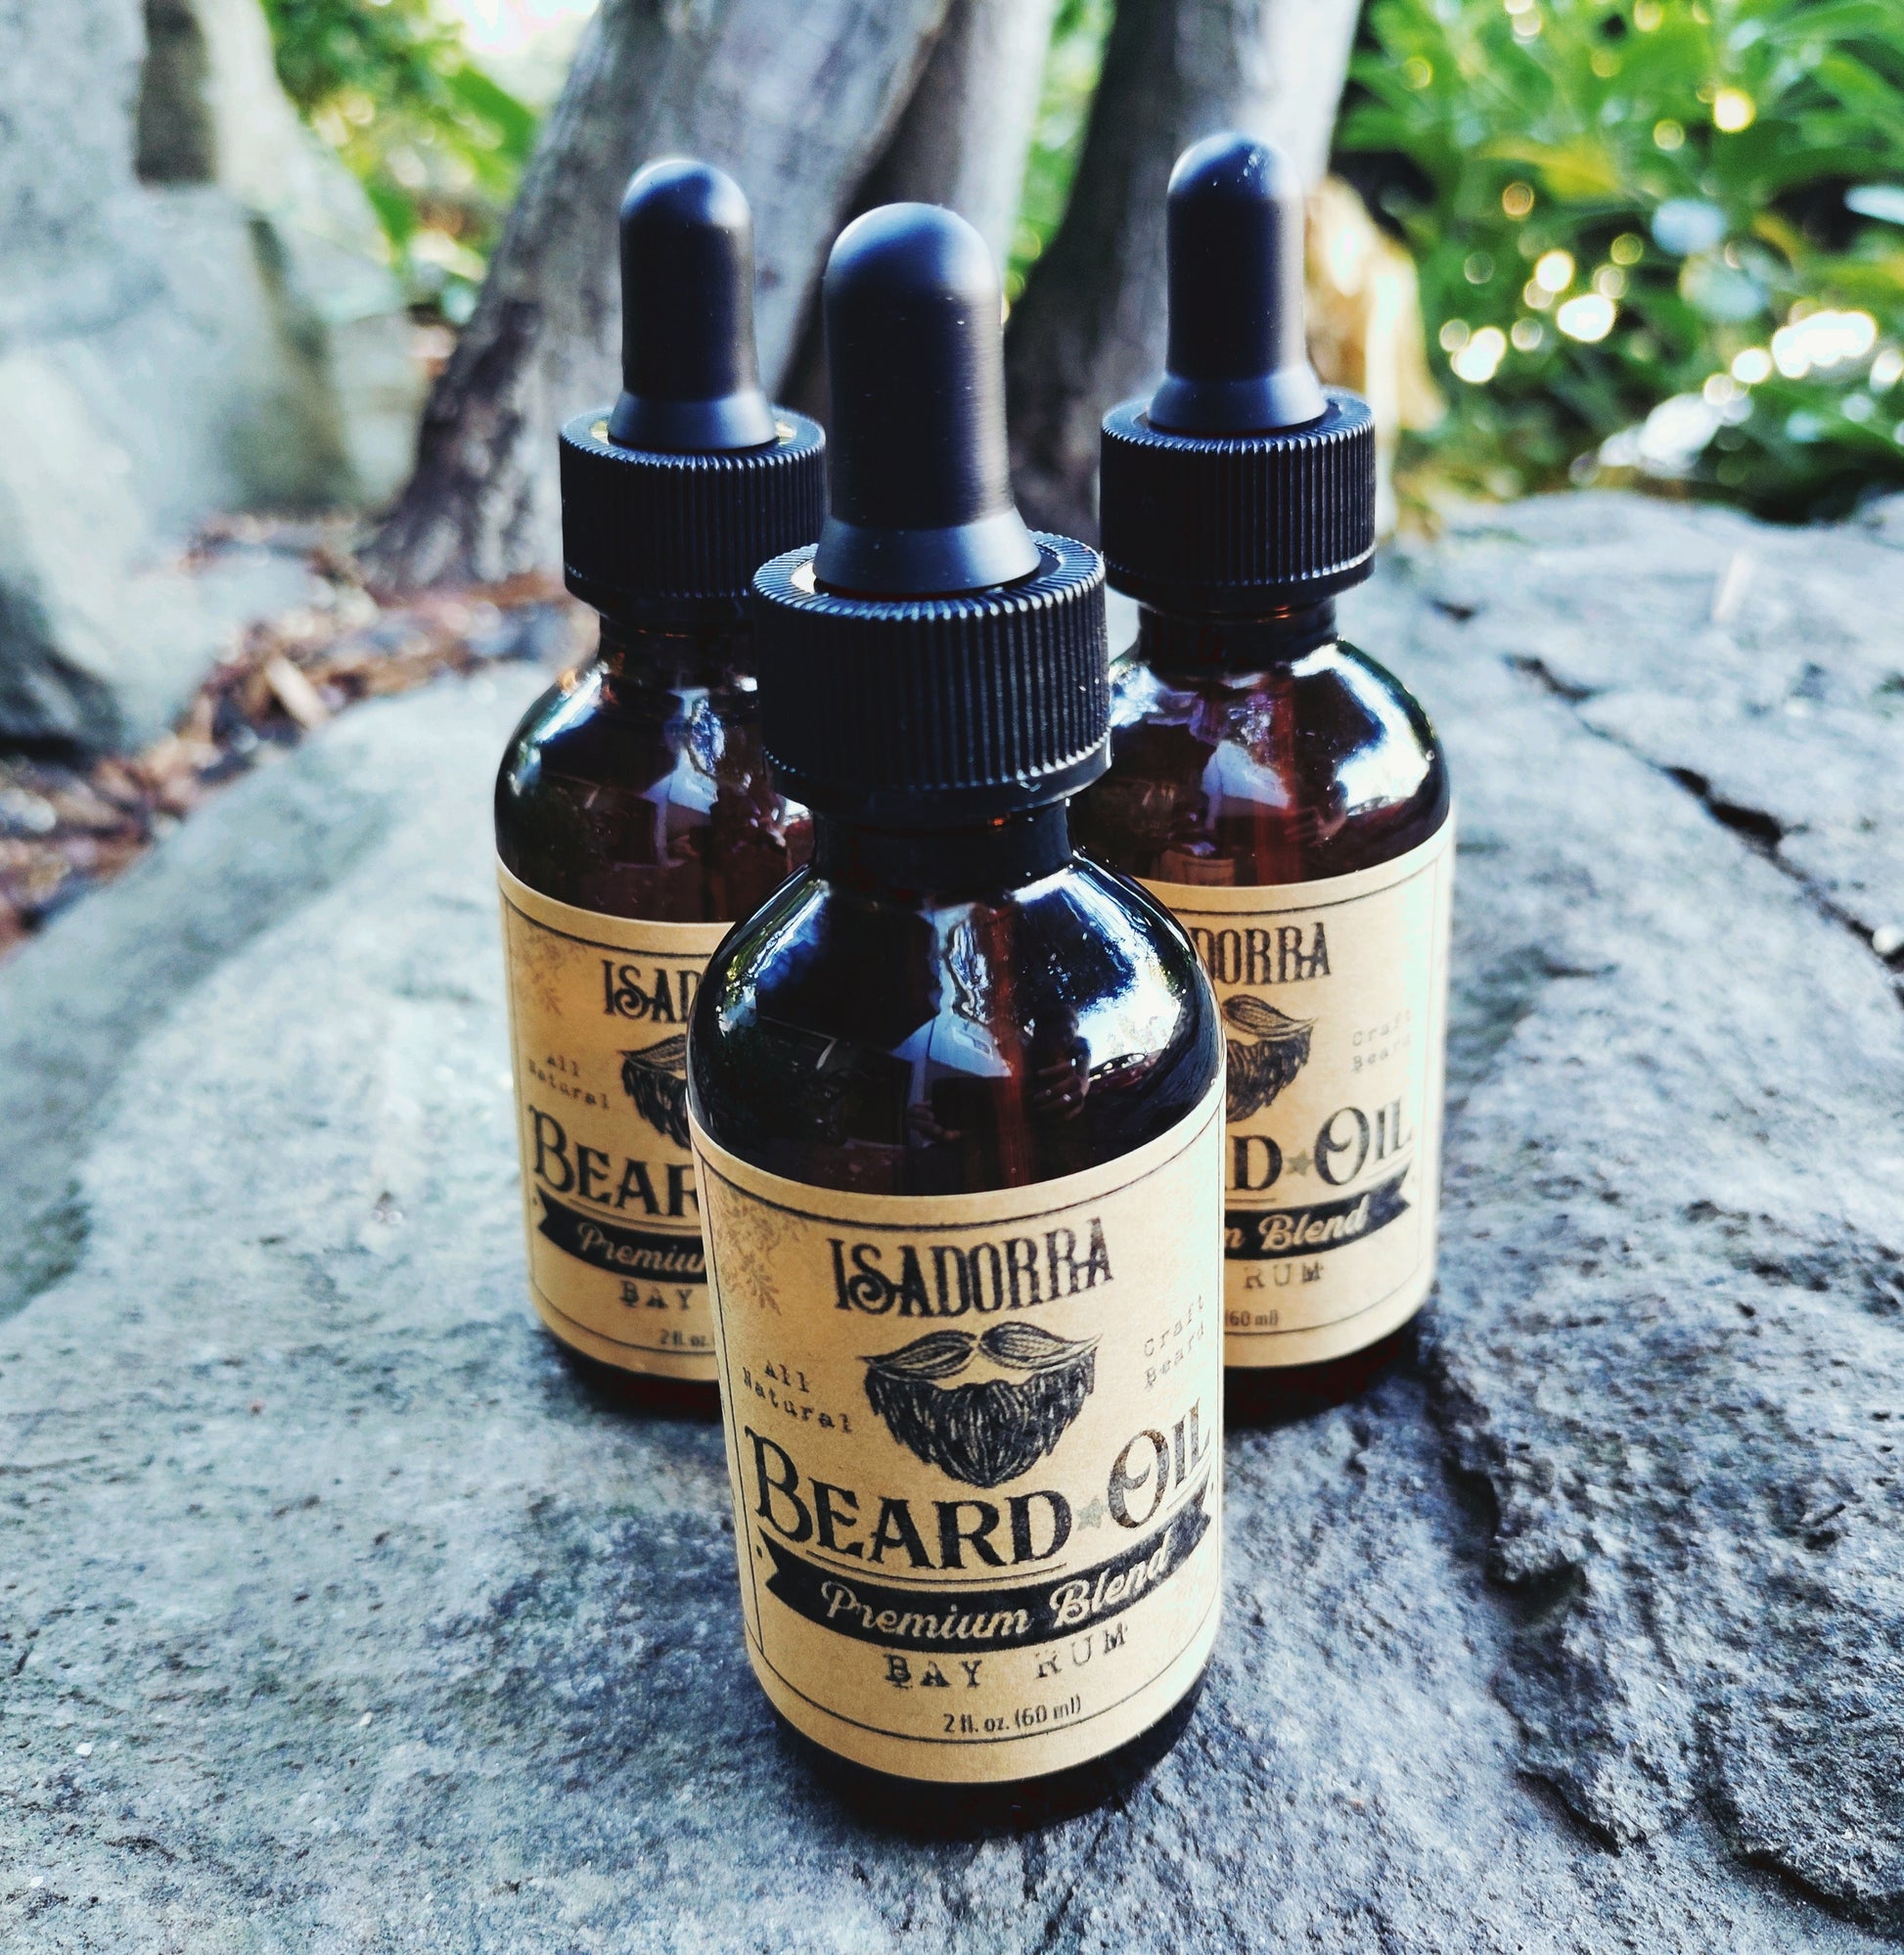 Handcrafted Beard Oil with Jojoba Seed Oil and Cold Pressed Almond Oil. Zero Fillers or Preservatives. 